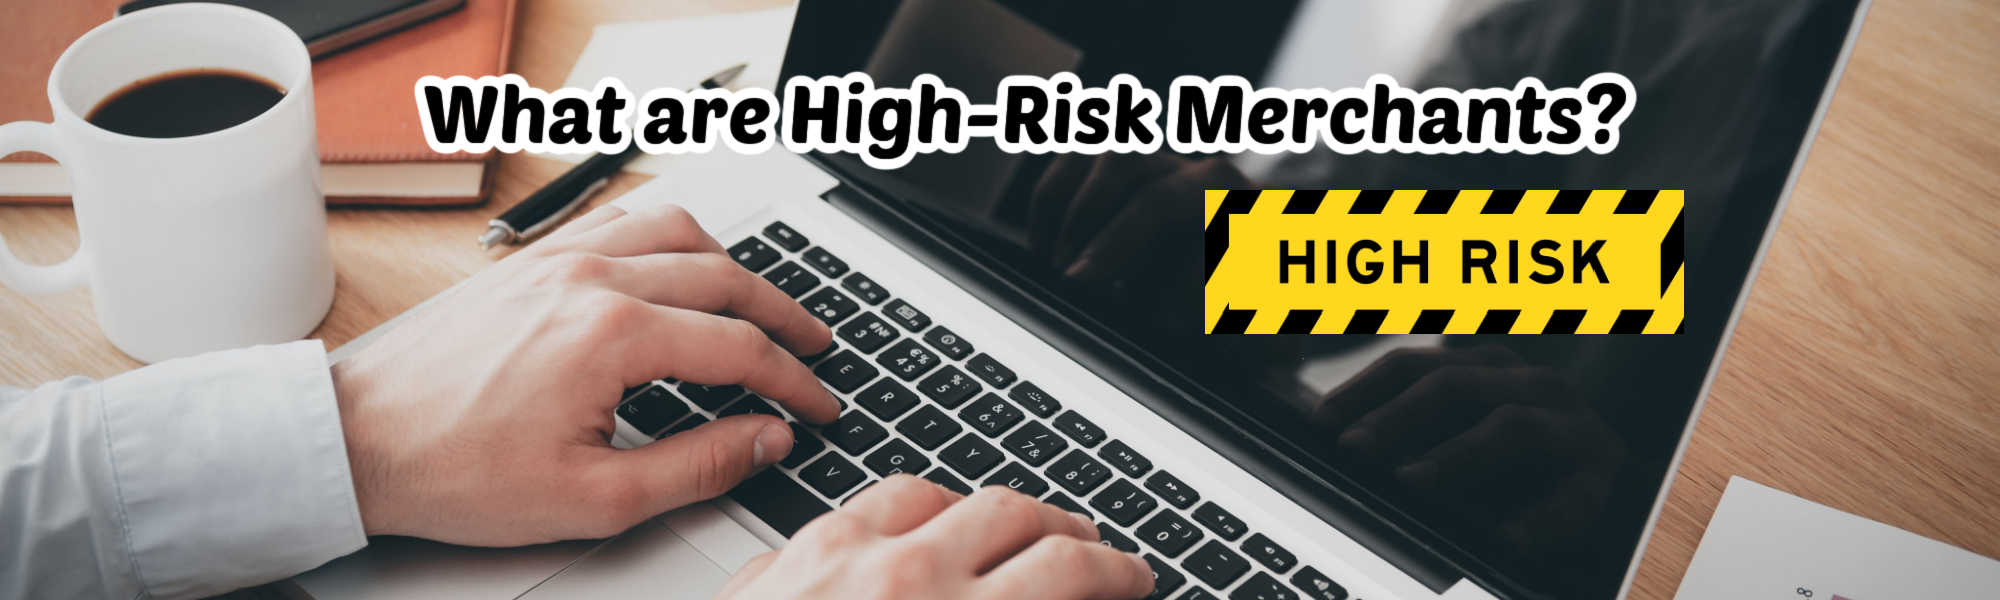 image of what are high risk merchants